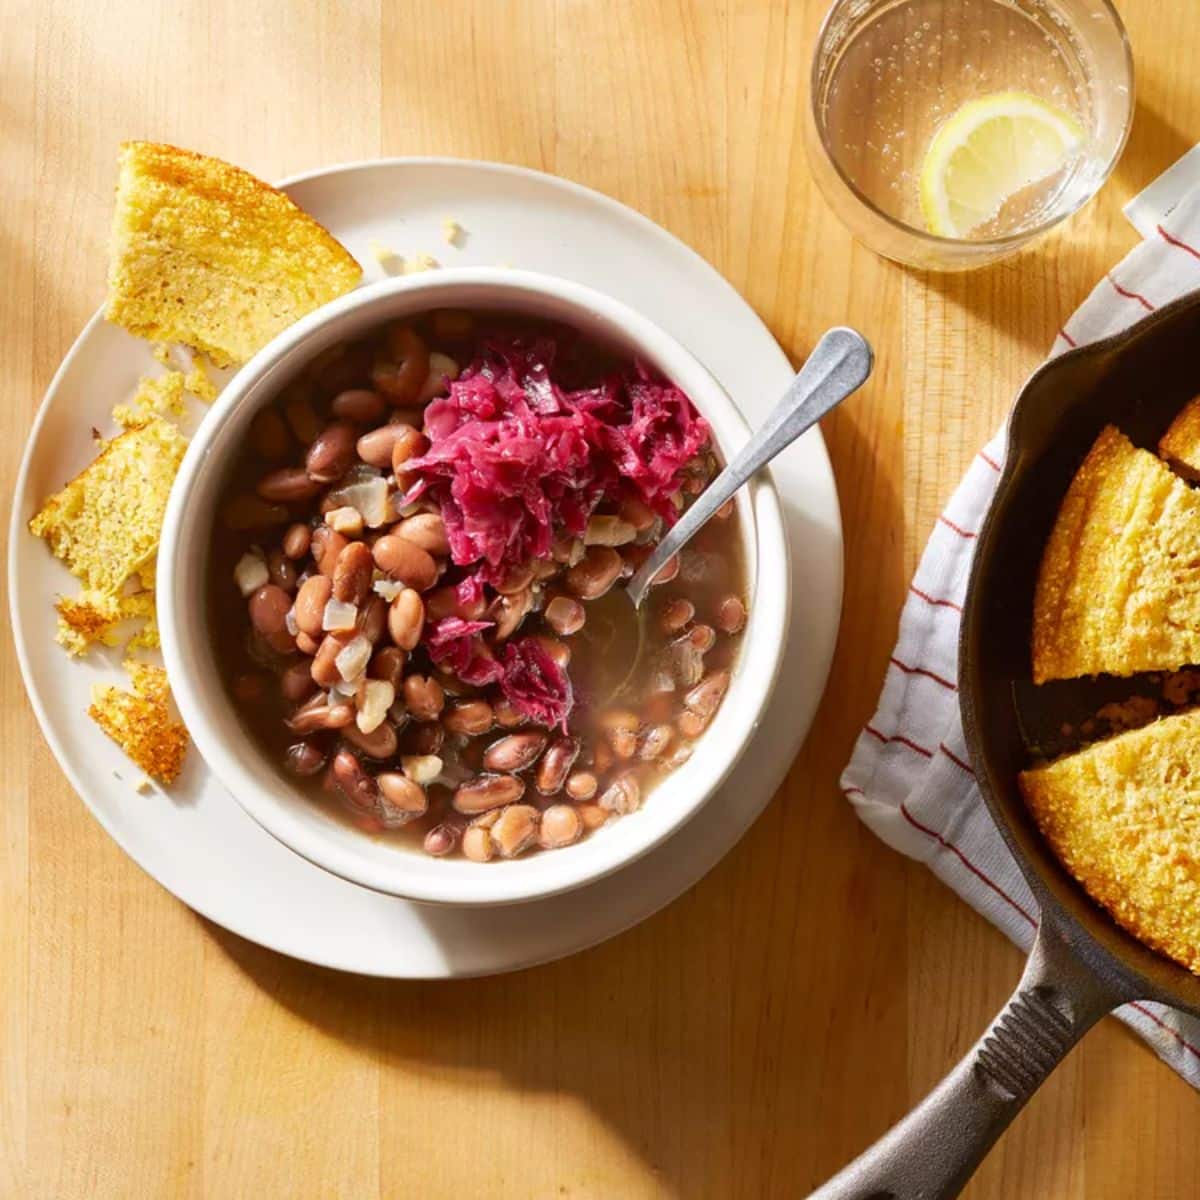 Soup beans with cornbread and sauerkraut in a white bowl.